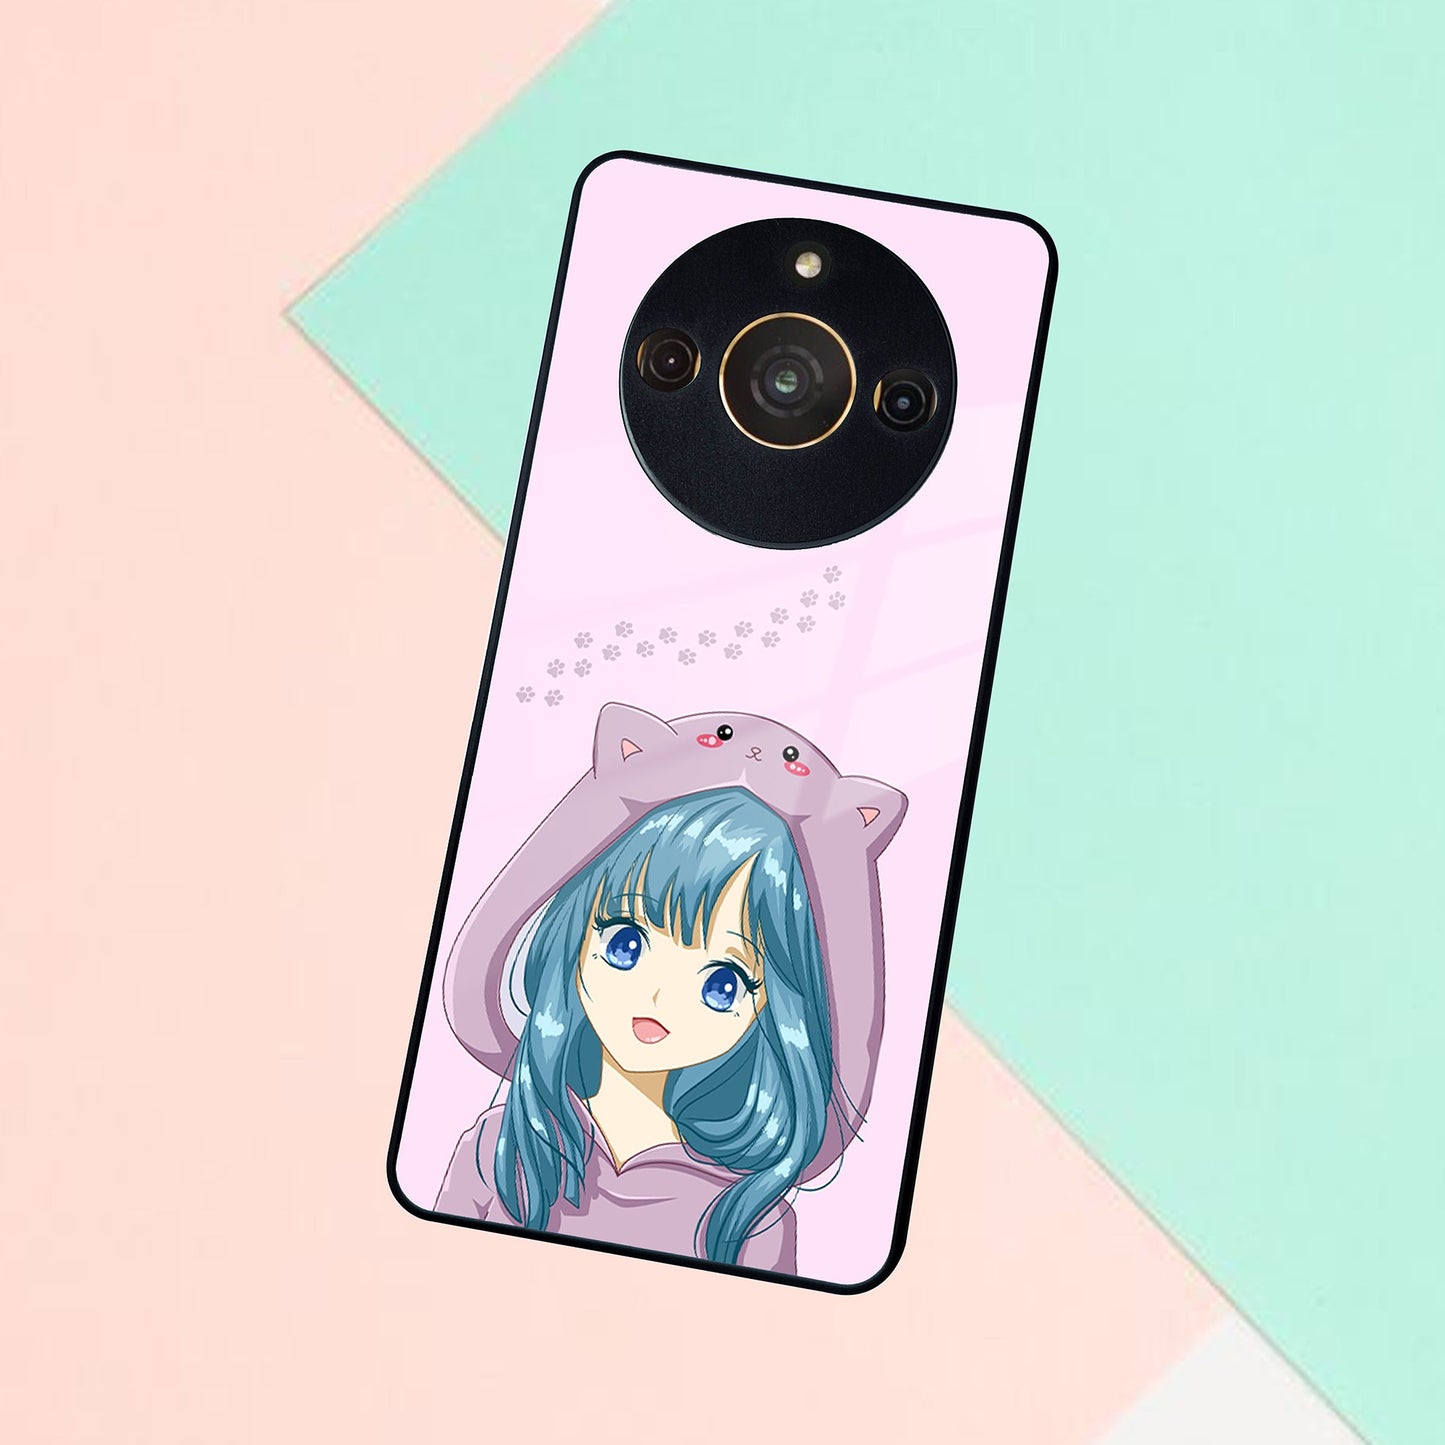 Purple Aesthetic Girl With Cat Phone Glass Case Cover For Realme/Narzo